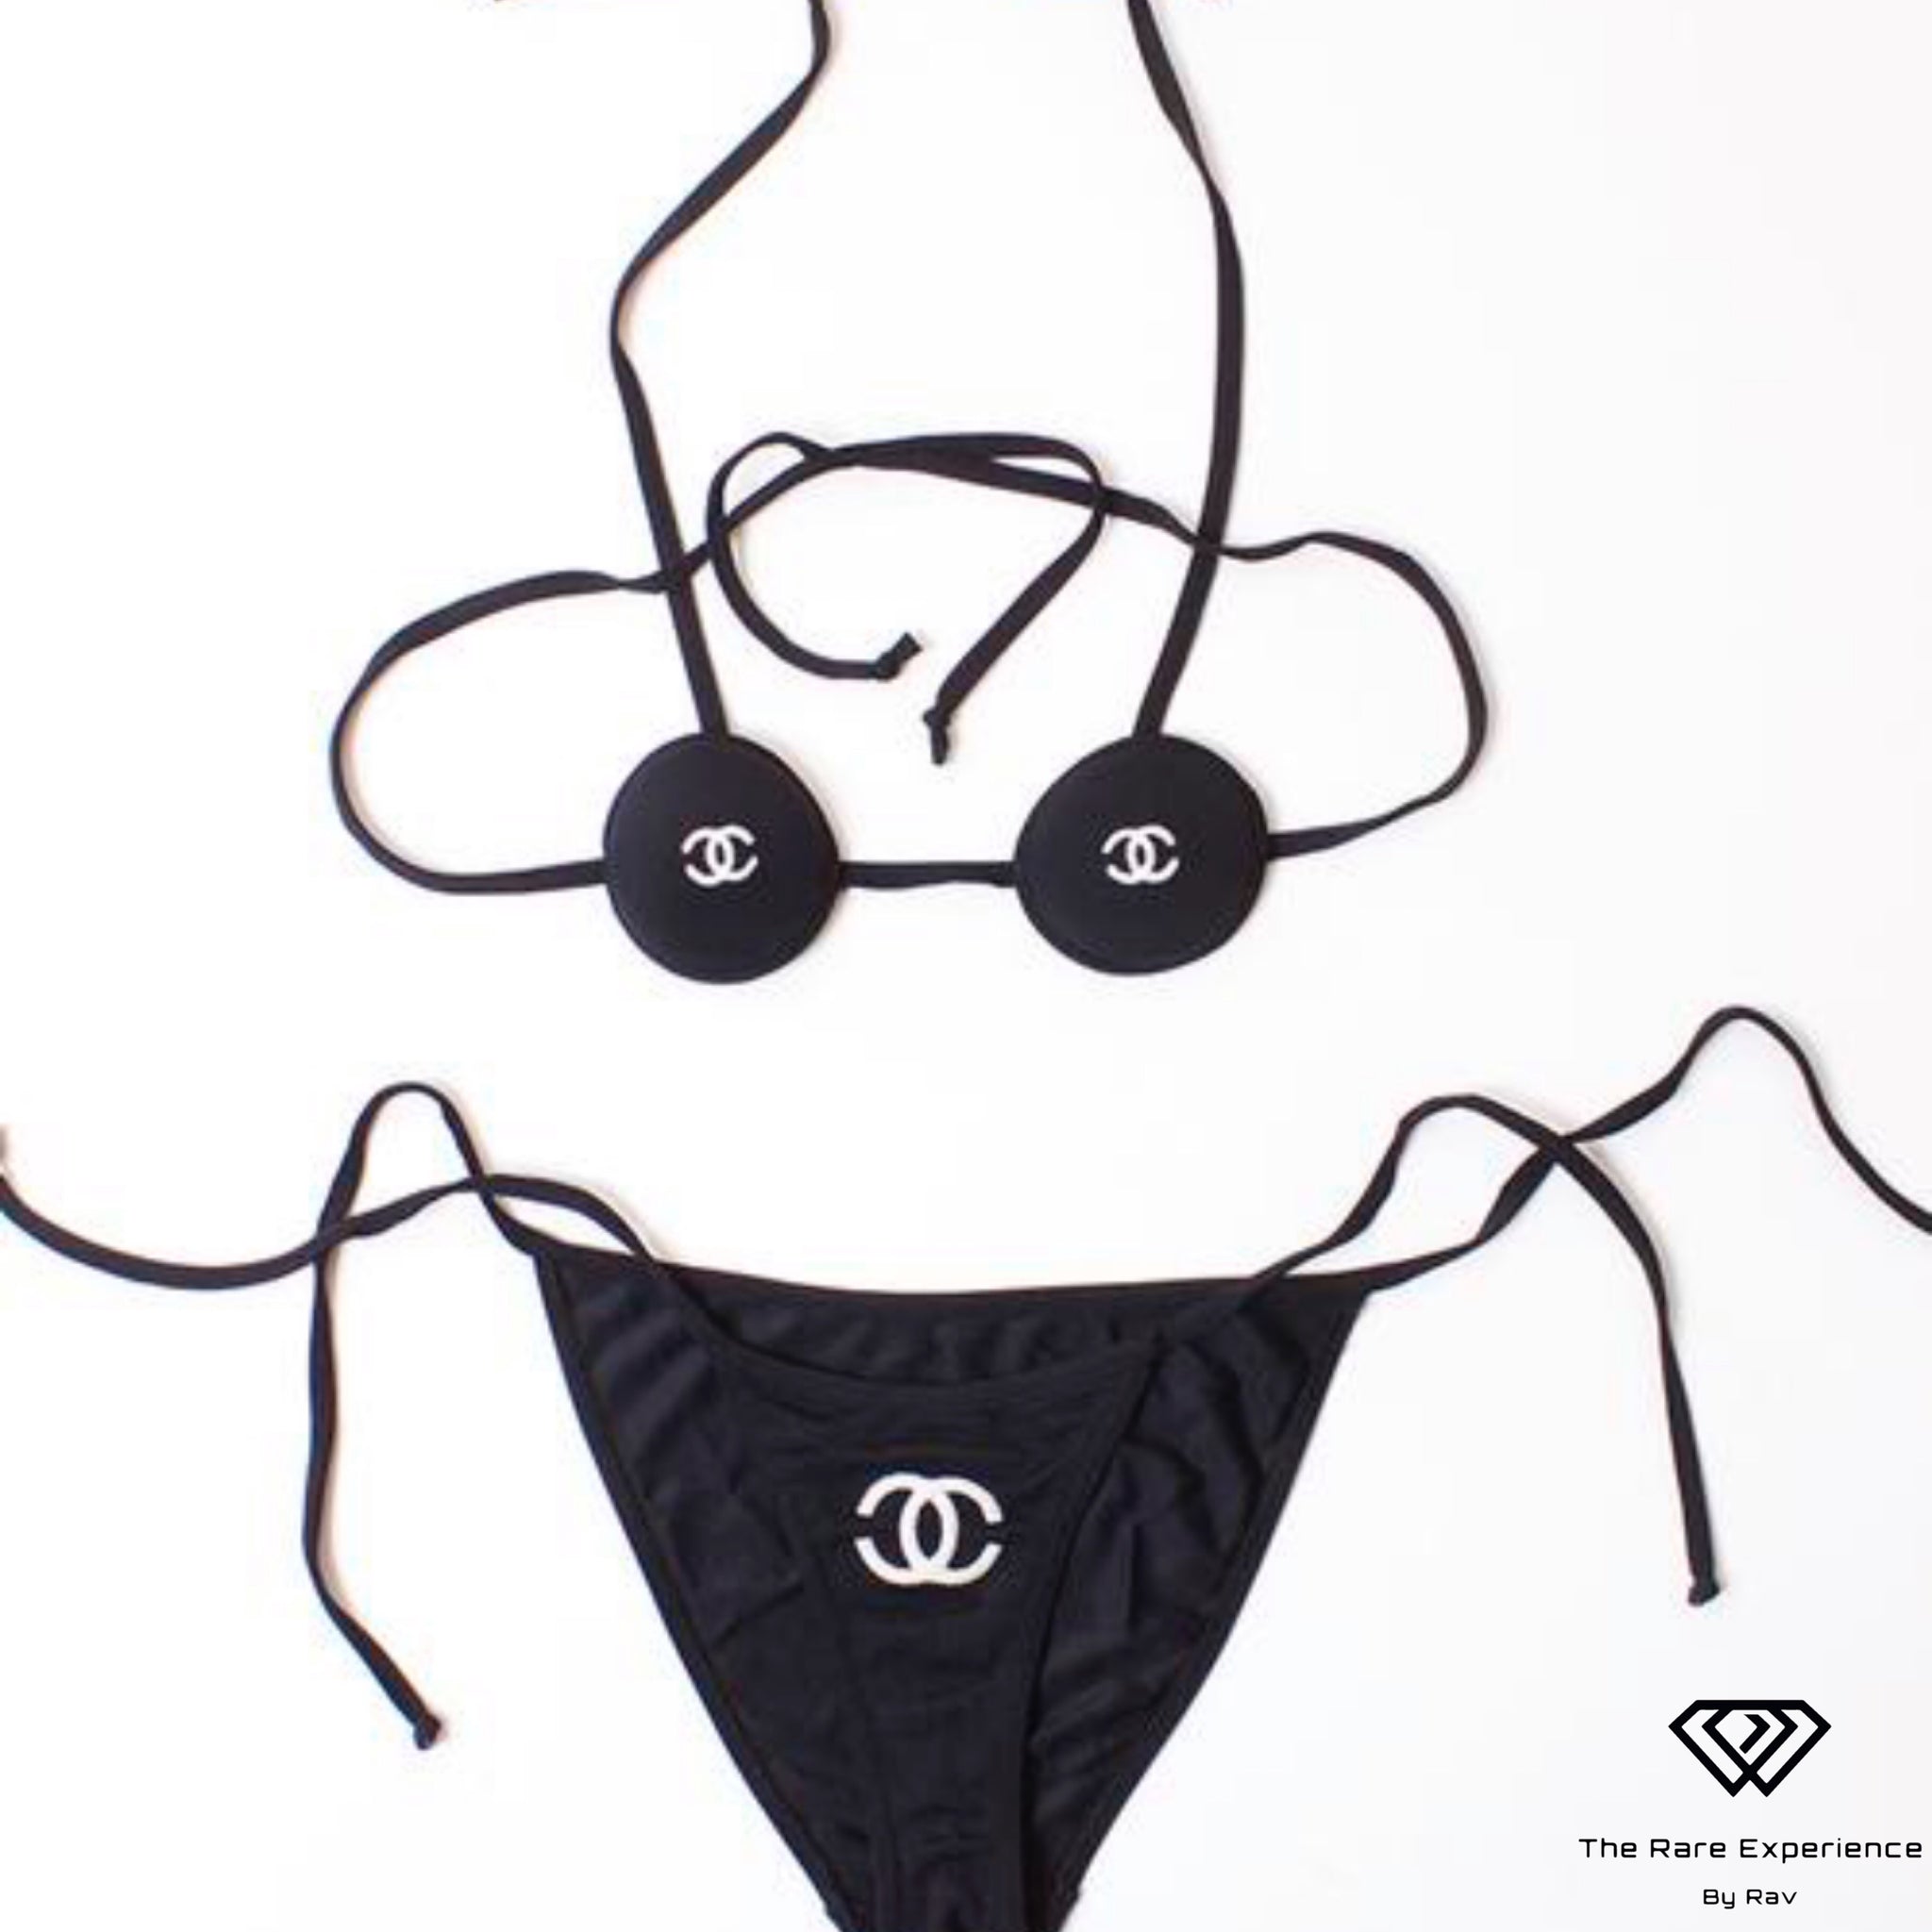 Rare CHANEL Bikini Swimsuit at Rice and Beans Vintage